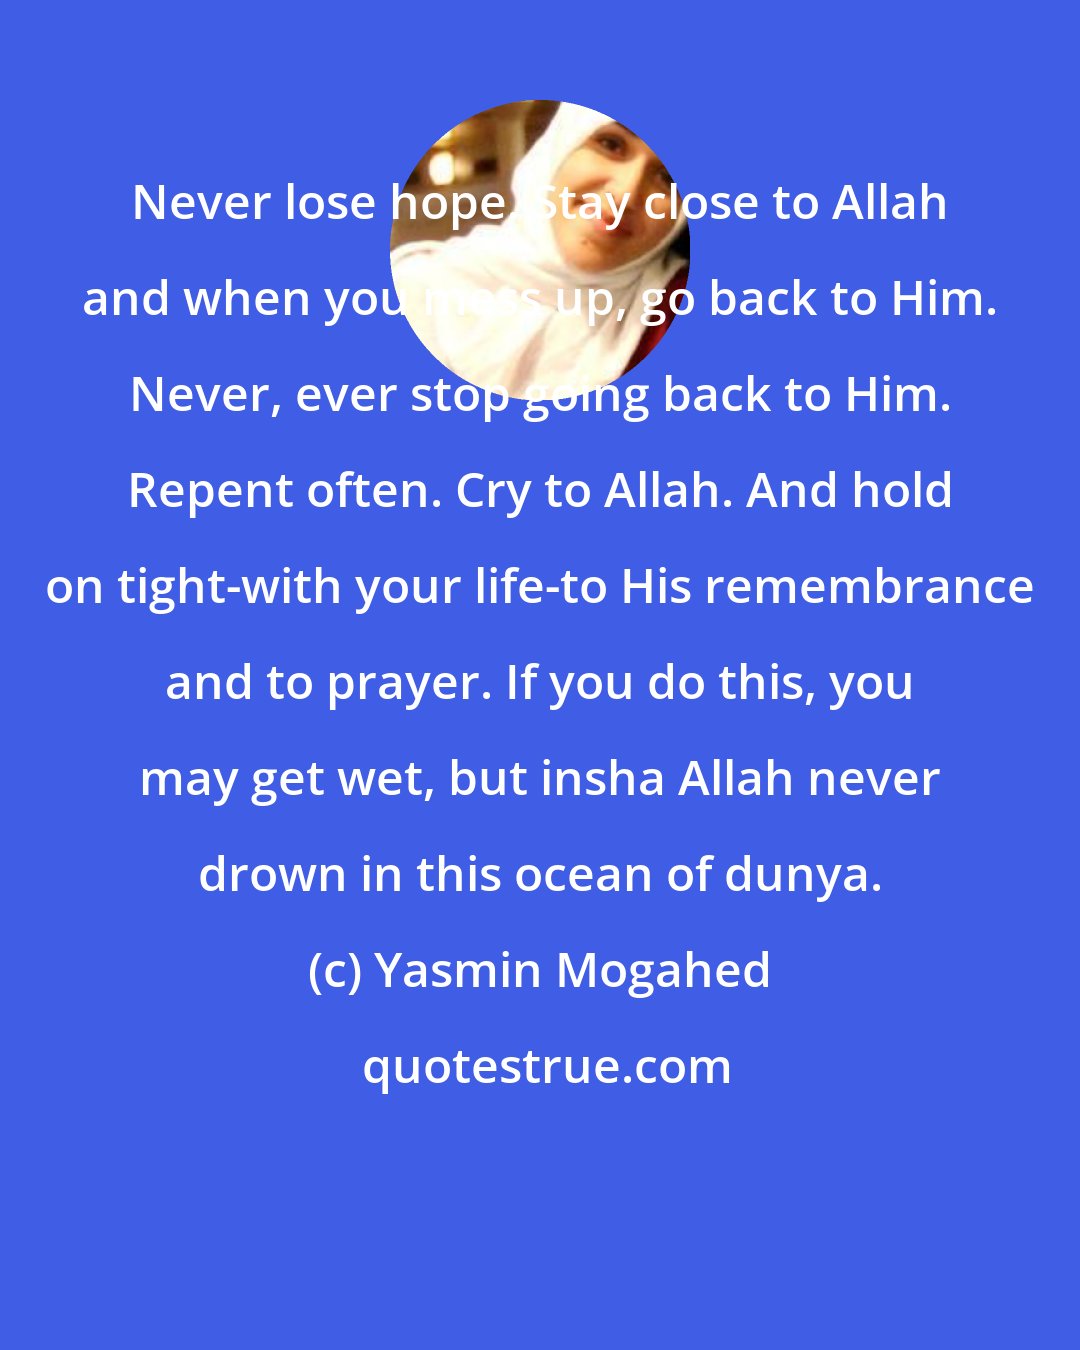 Yasmin Mogahed: Never lose hope. Stay close to Allah and when you mess up, go back to Him. Never, ever stop going back to Him. Repent often. Cry to Allah. And hold on tight-with your life-to His remembrance and to prayer. If you do this, you may get wet, but insha Allah never drown in this ocean of dunya.